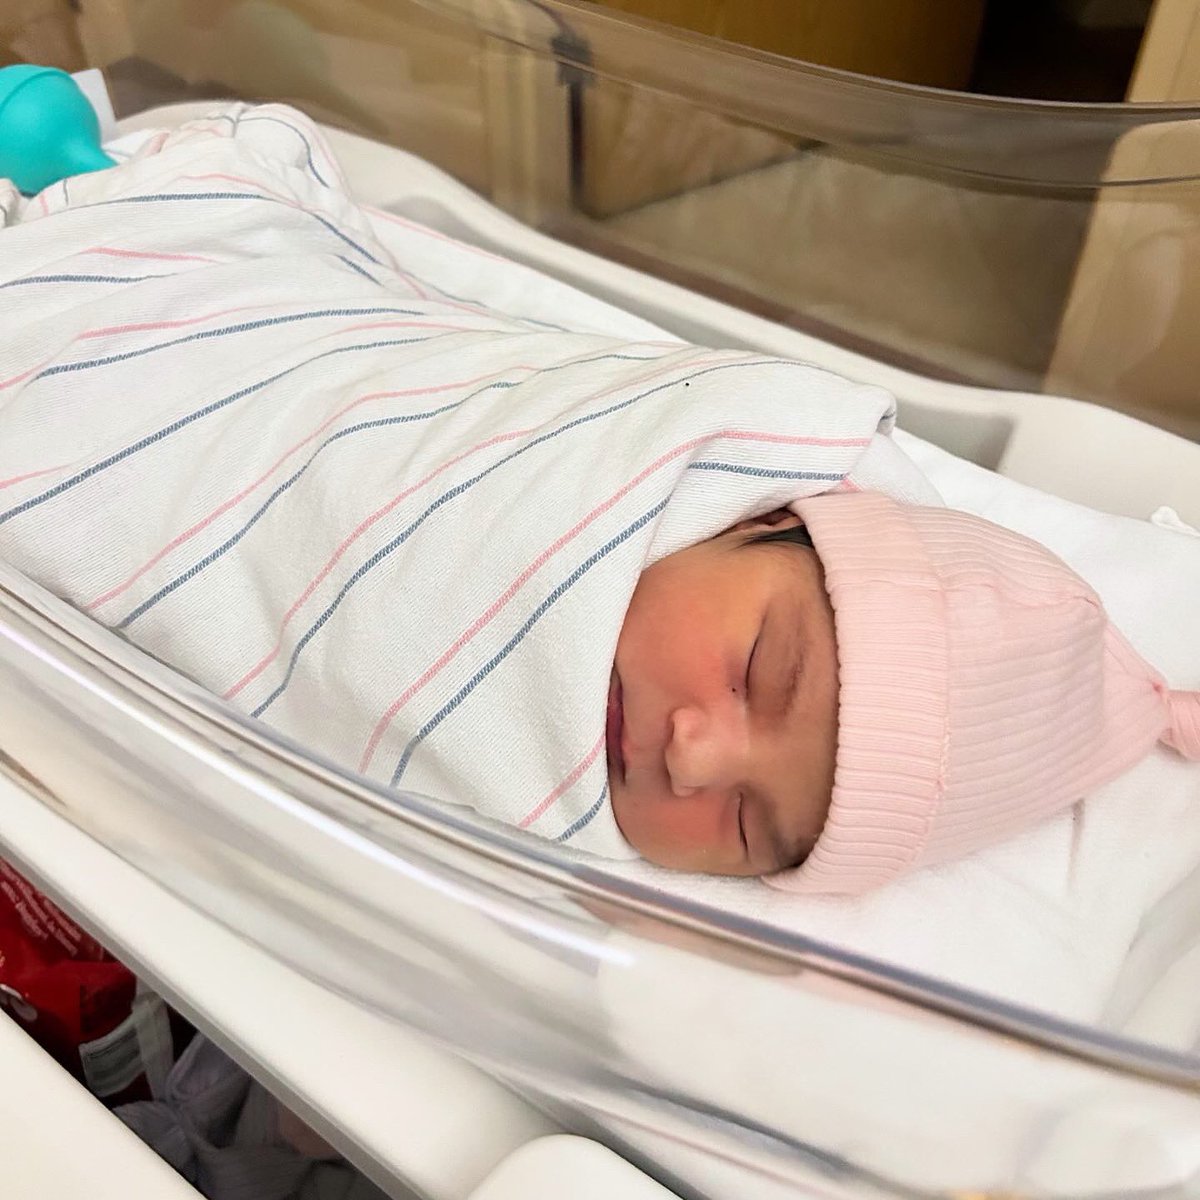 Congrats to teen mama, Adriana! Her baby girl was born safely. 

Thank you so much to everyone who helped with the baby registry we did for these two recently. ❤️

#praisegod #chooseyourbaby #antiabortion